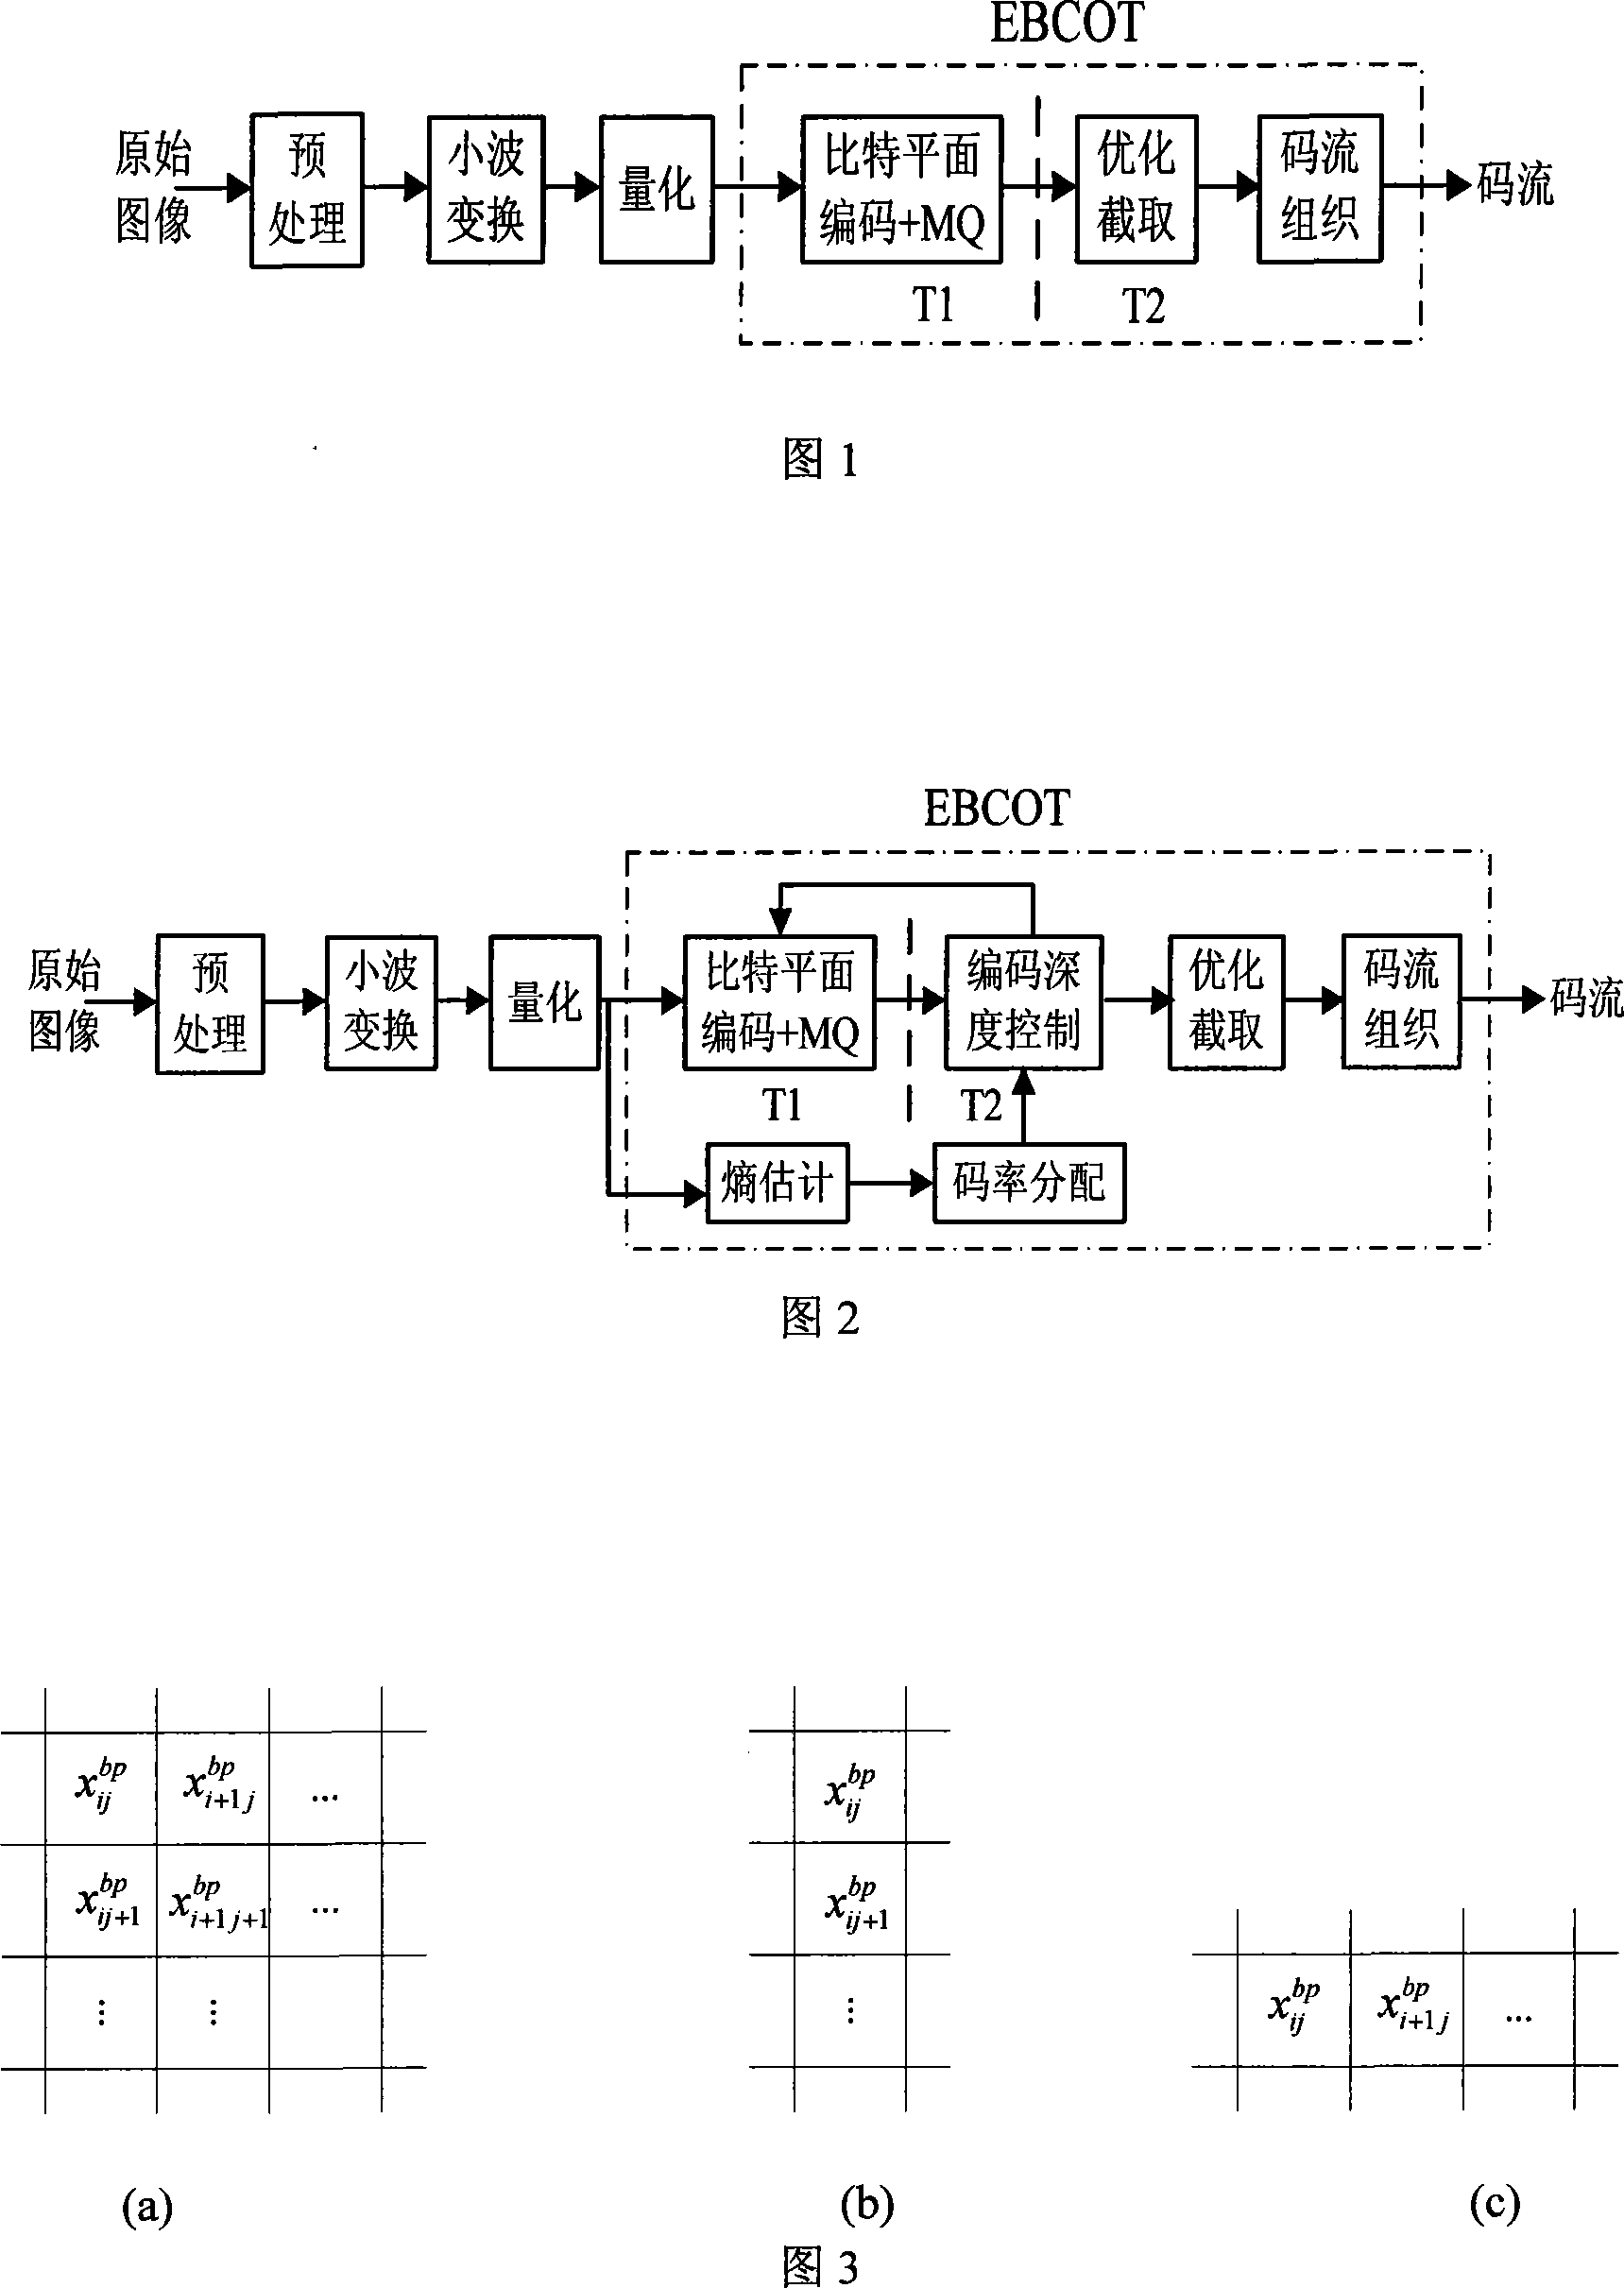 JPEG2000 self-adapted rate control system and method based on pre-allocated code rate